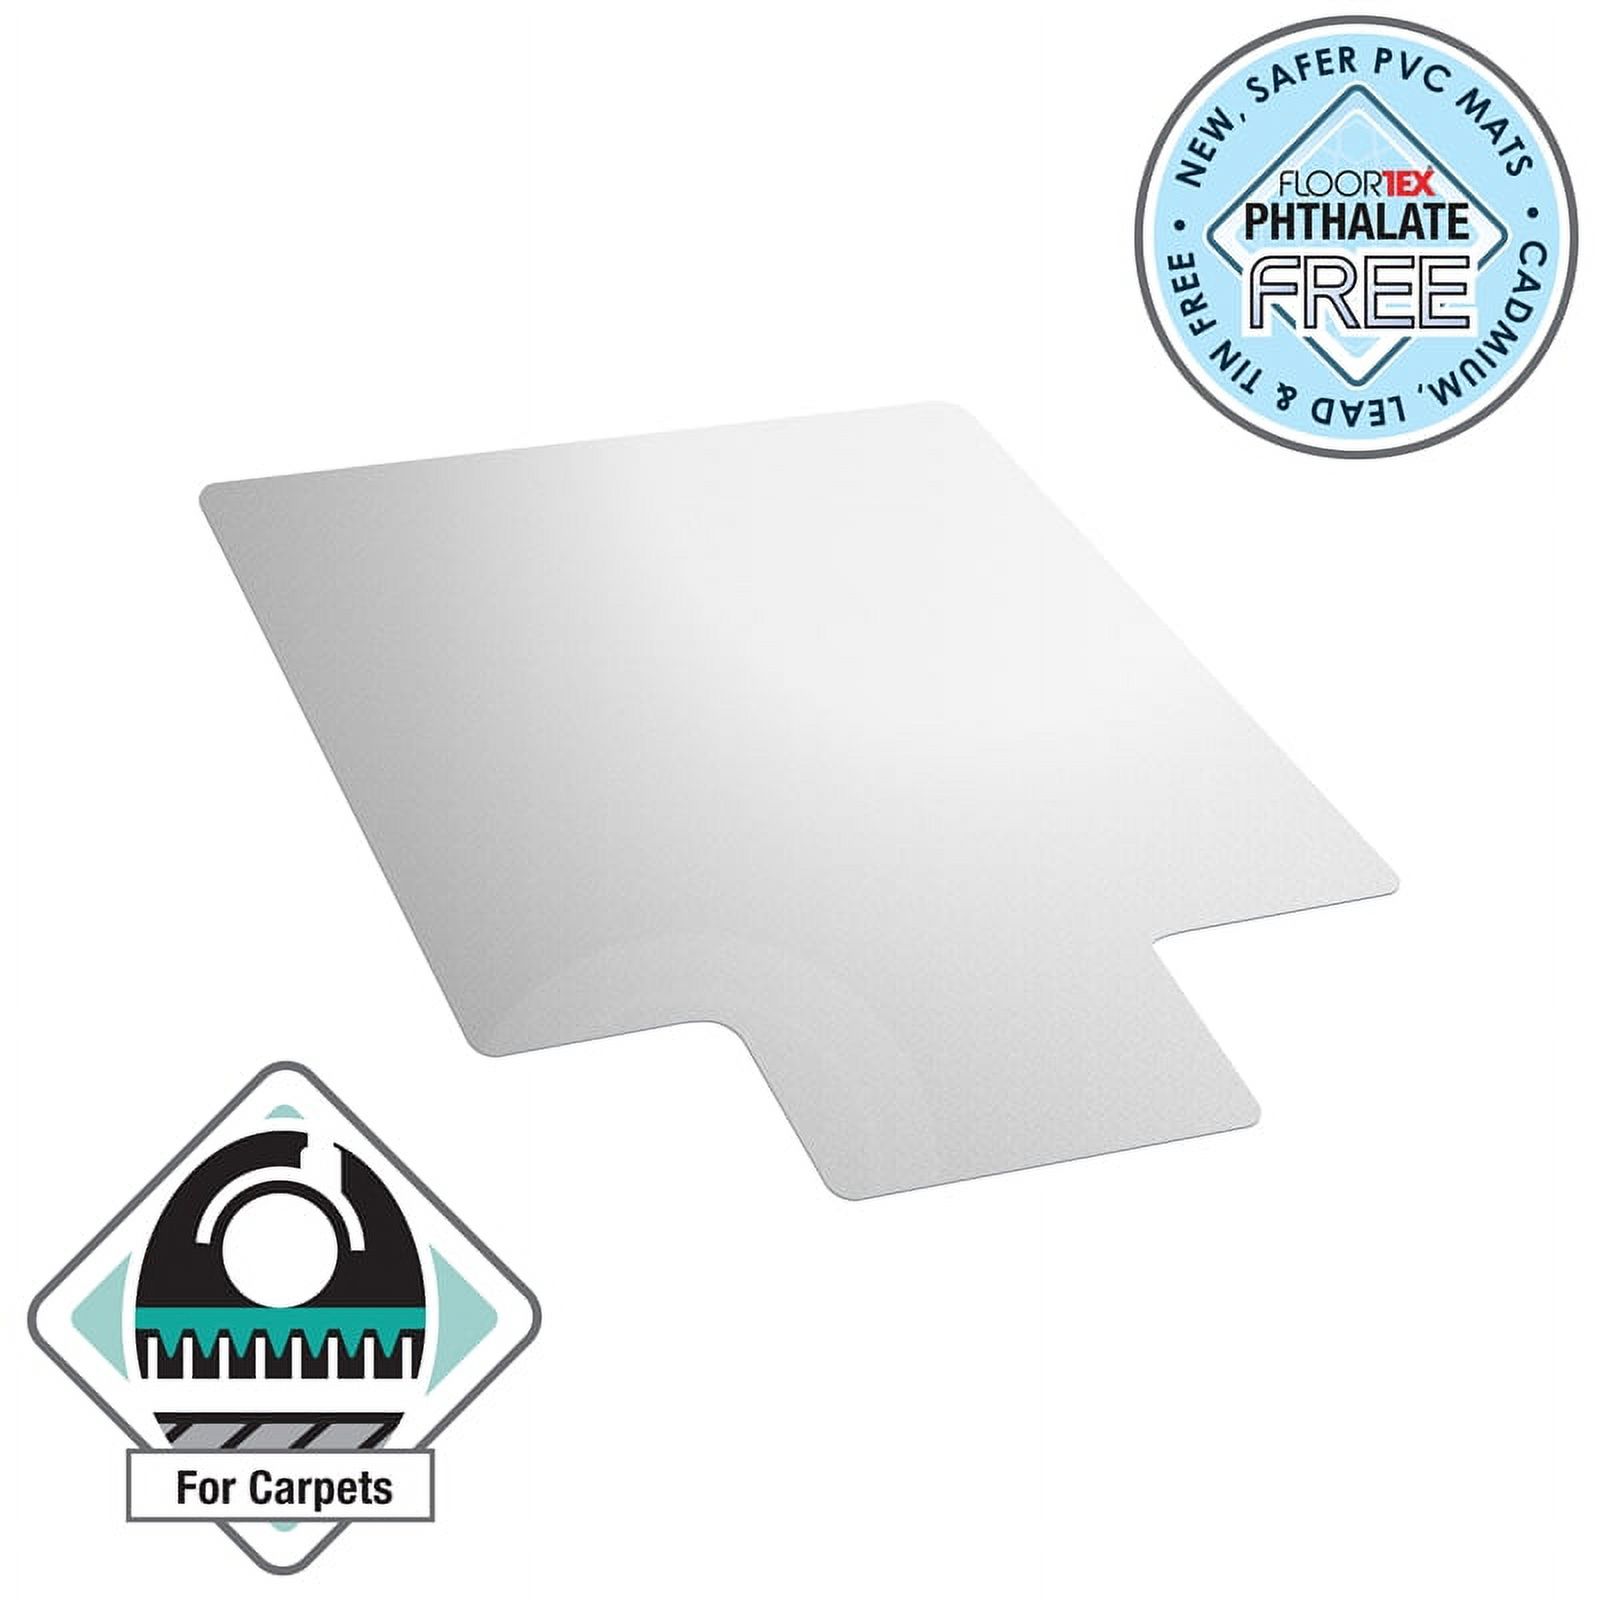 Advantagemat® Vinyl Lipped Chair Mat for Carpets up to 1/4" - 36" x 48" - image 1 of 2